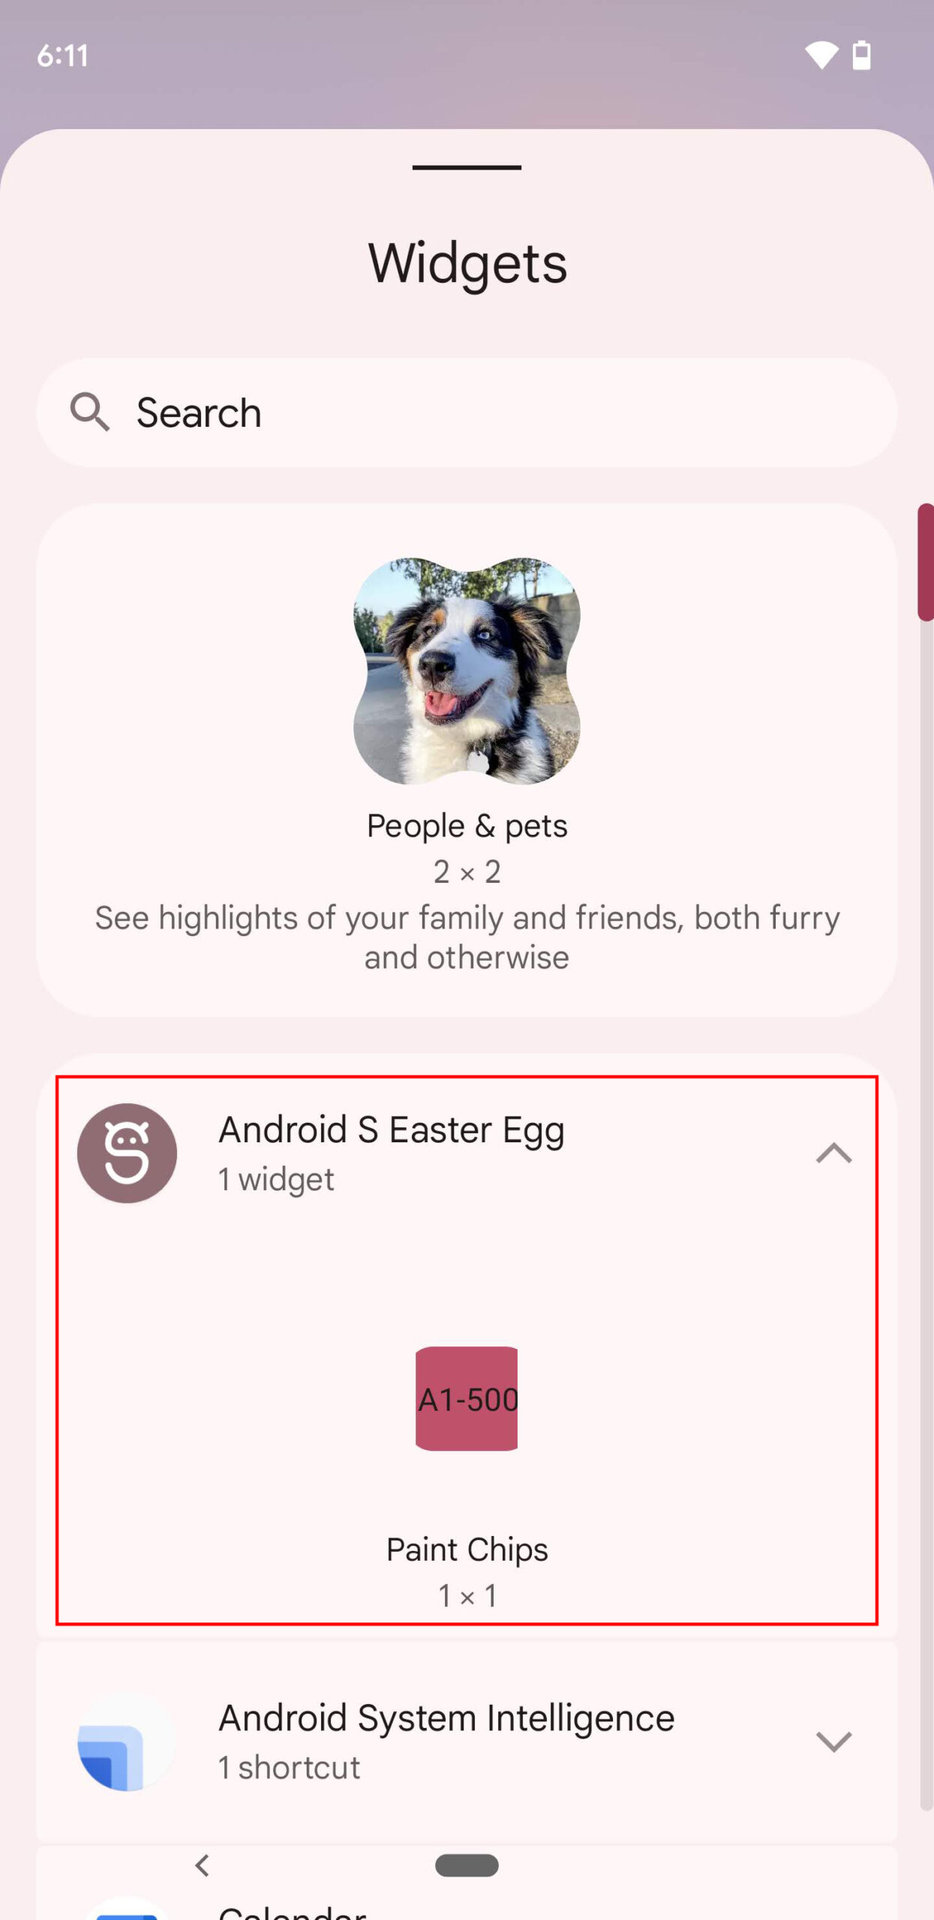 How to use the Android S Easter egg widget (2)